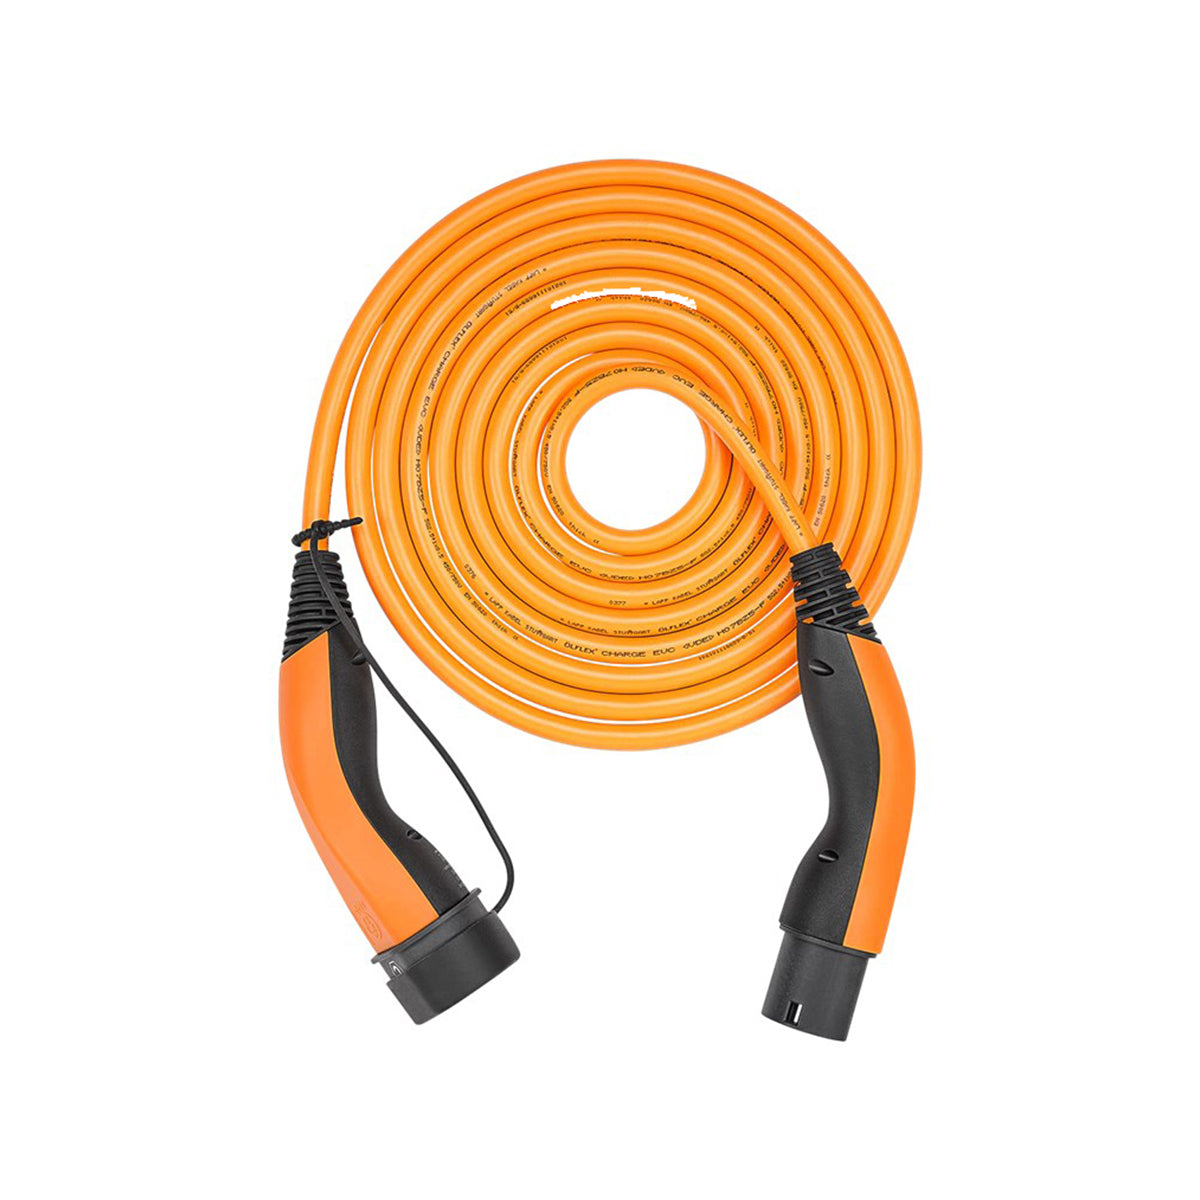 LAPP EV Helix Charge Cable Type 2 (7.4kW-1P-32A) 5m for Hybrid and Electric Cars - Orange.